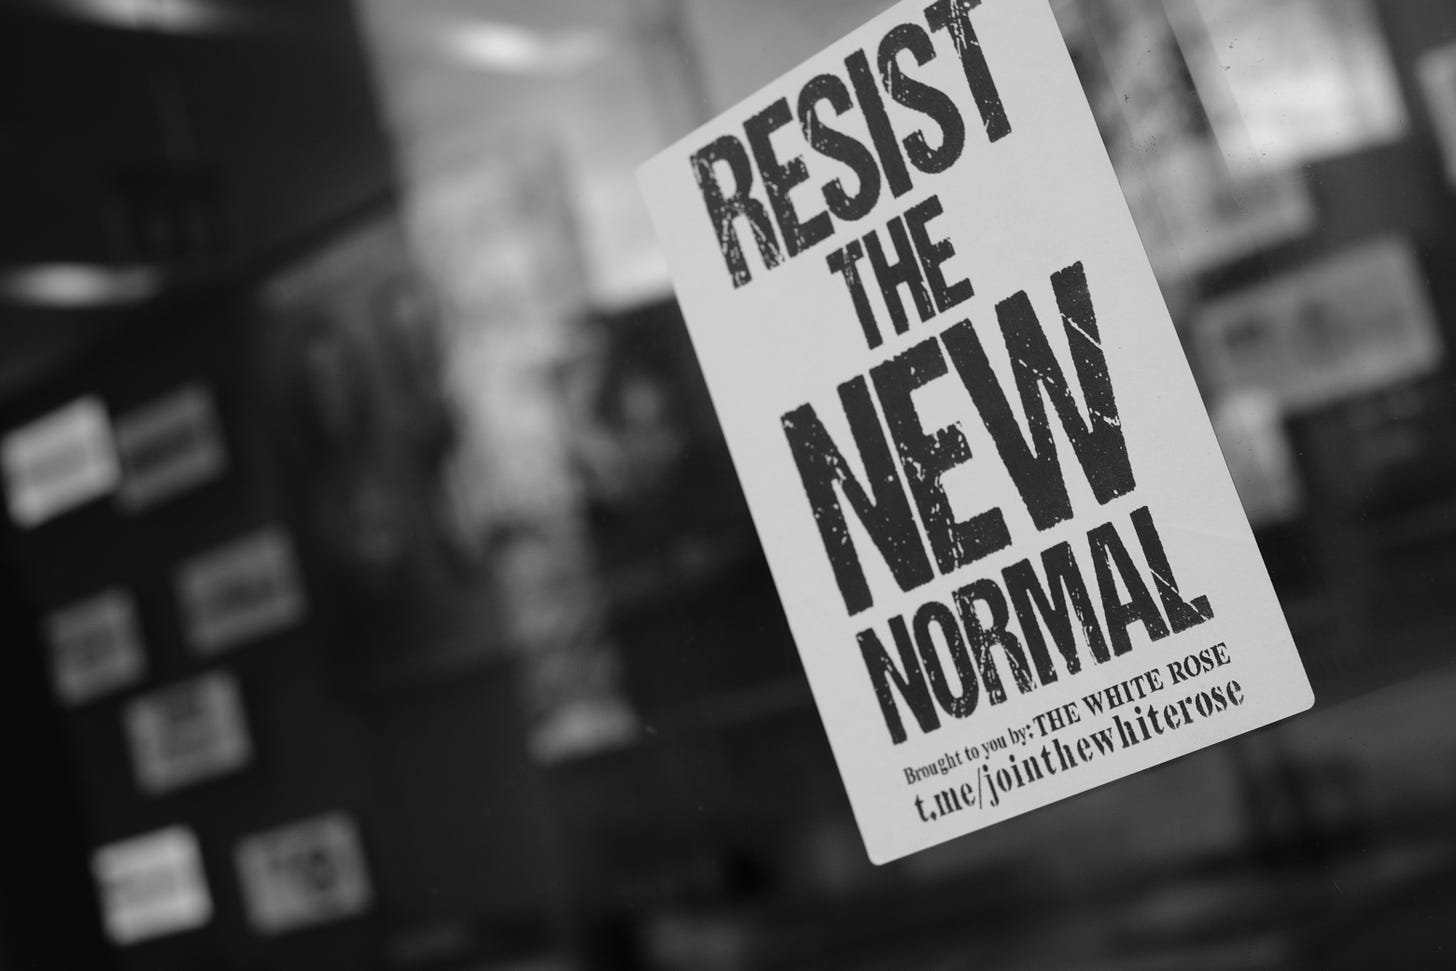 Resist the new normal